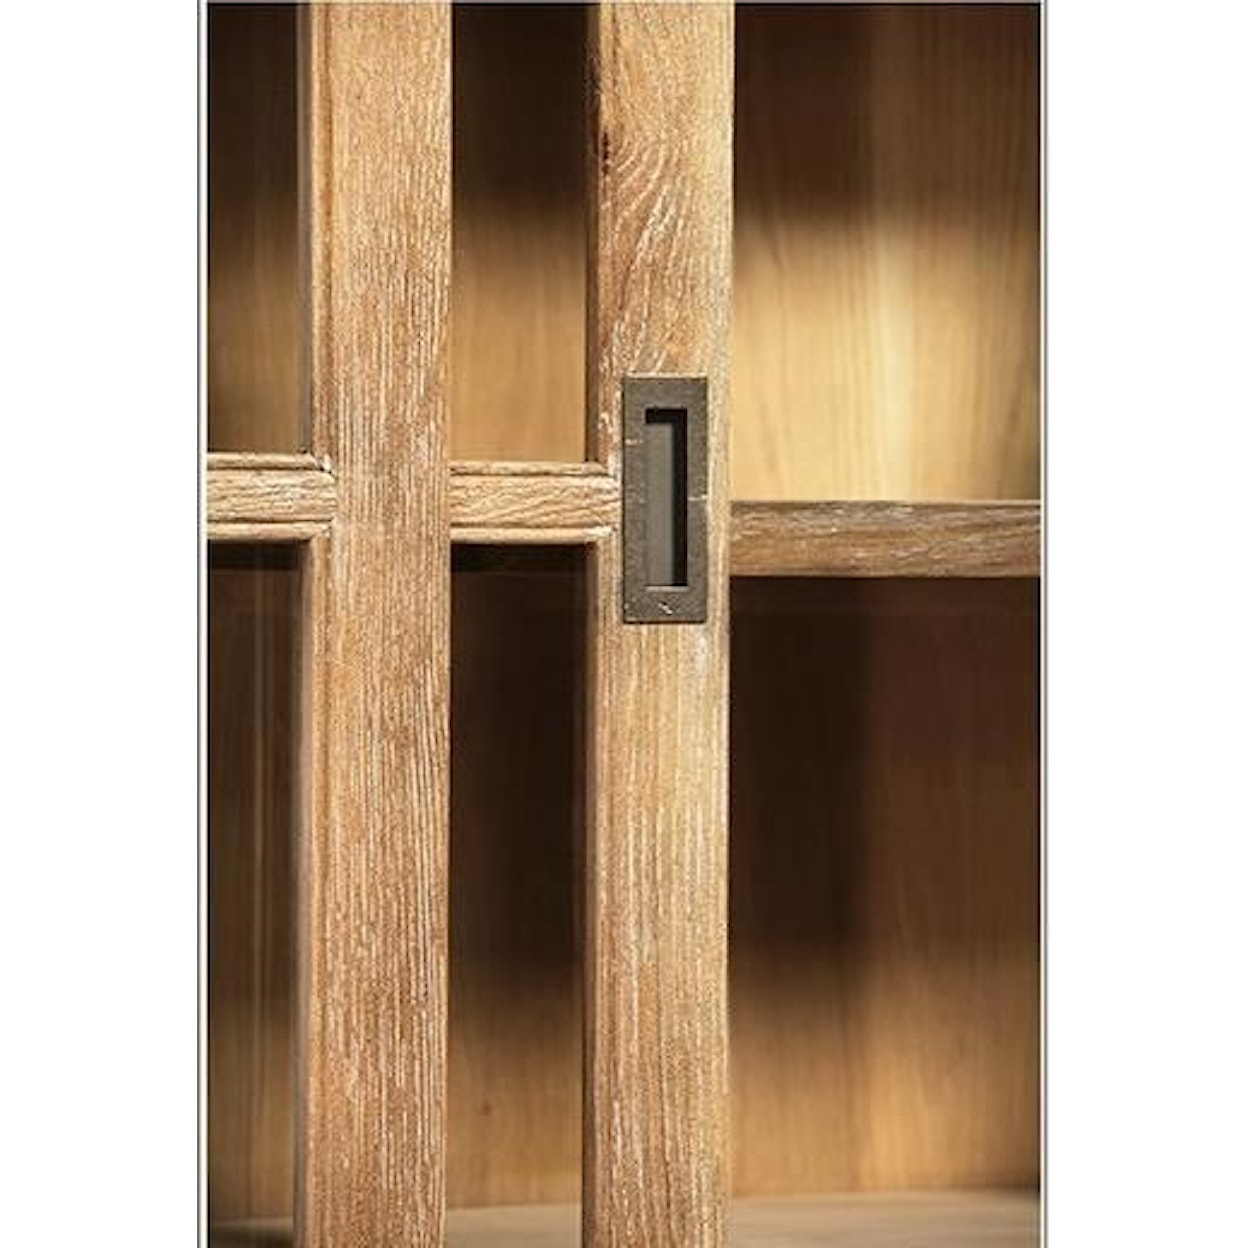 Dovetail Furniture Cabinets Dundee Cabinet